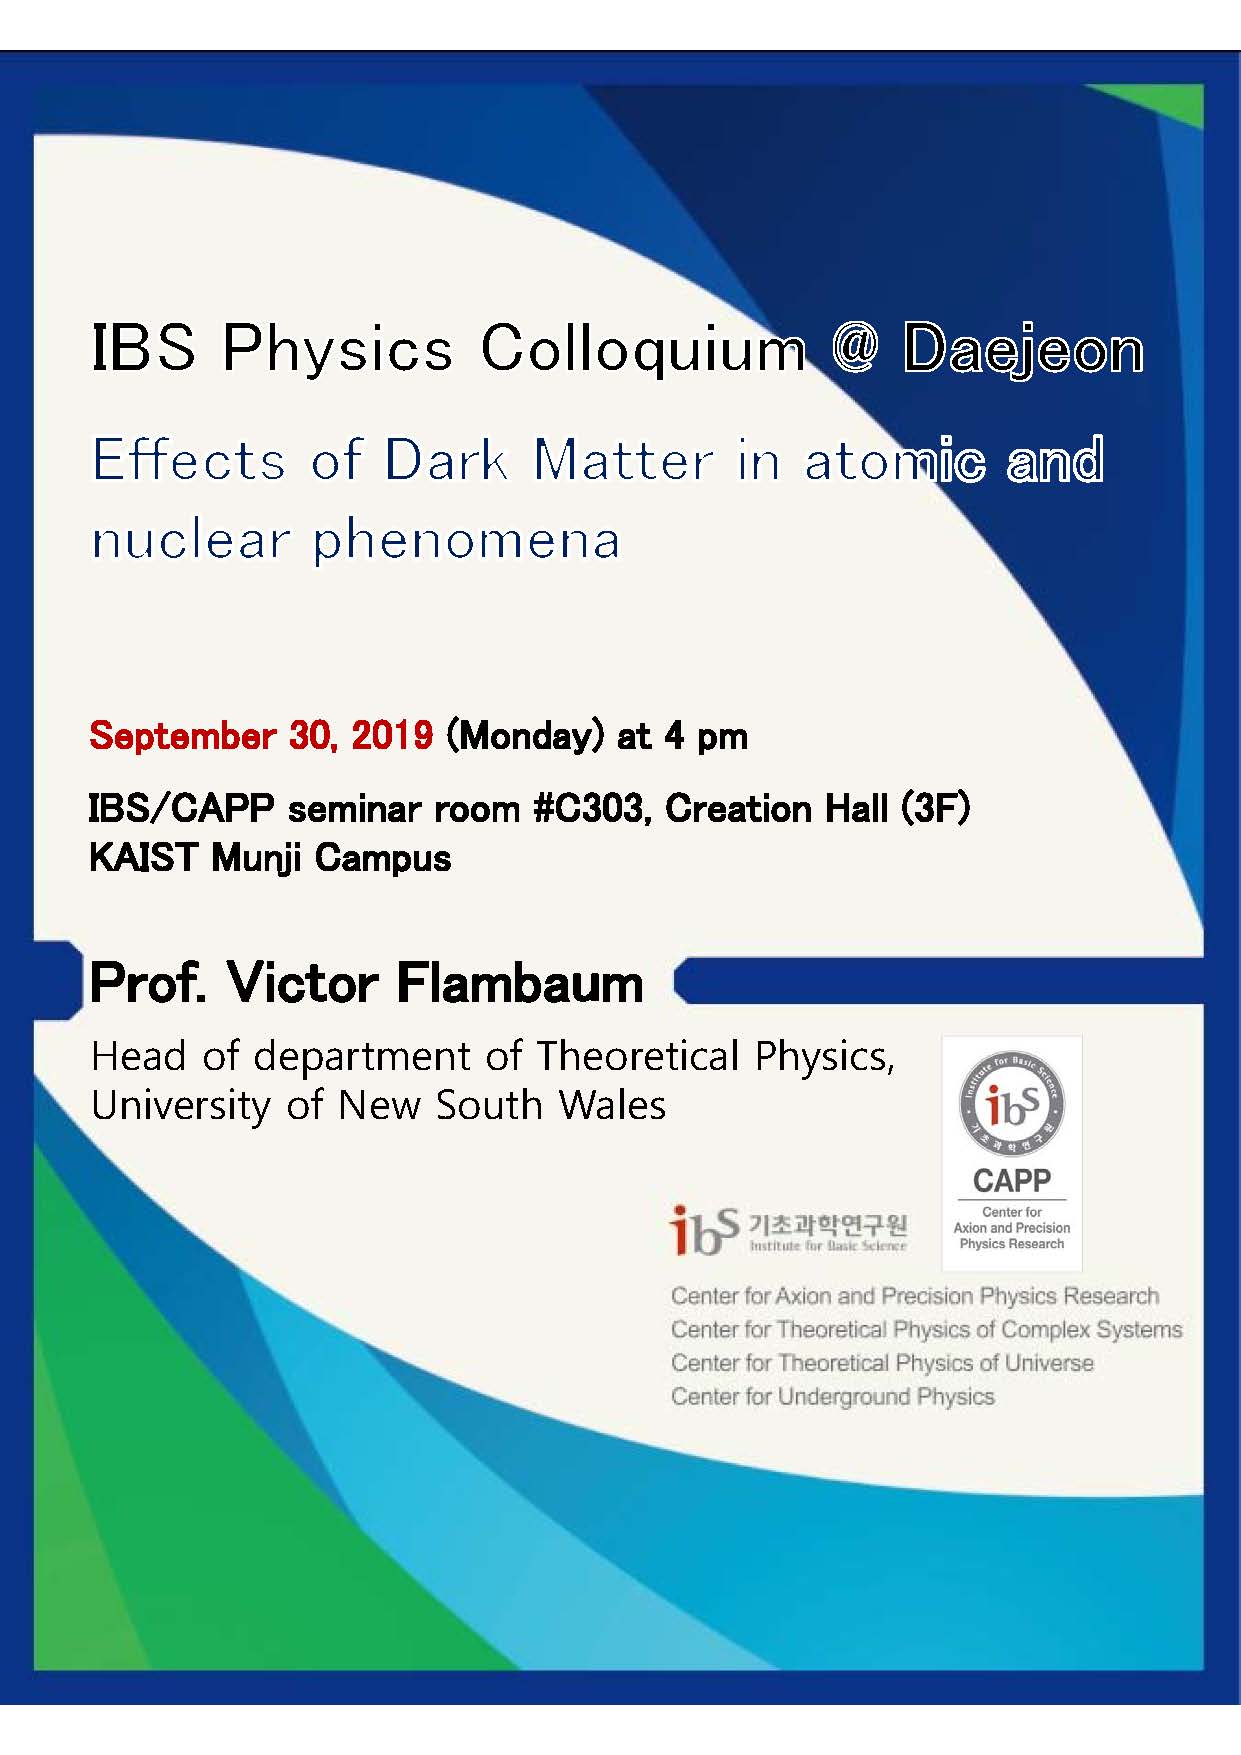 [IBS Colloquium] Effects of Dark Matter in atomic and nuclear phenomena by Prof. Victor Flambaum 사진